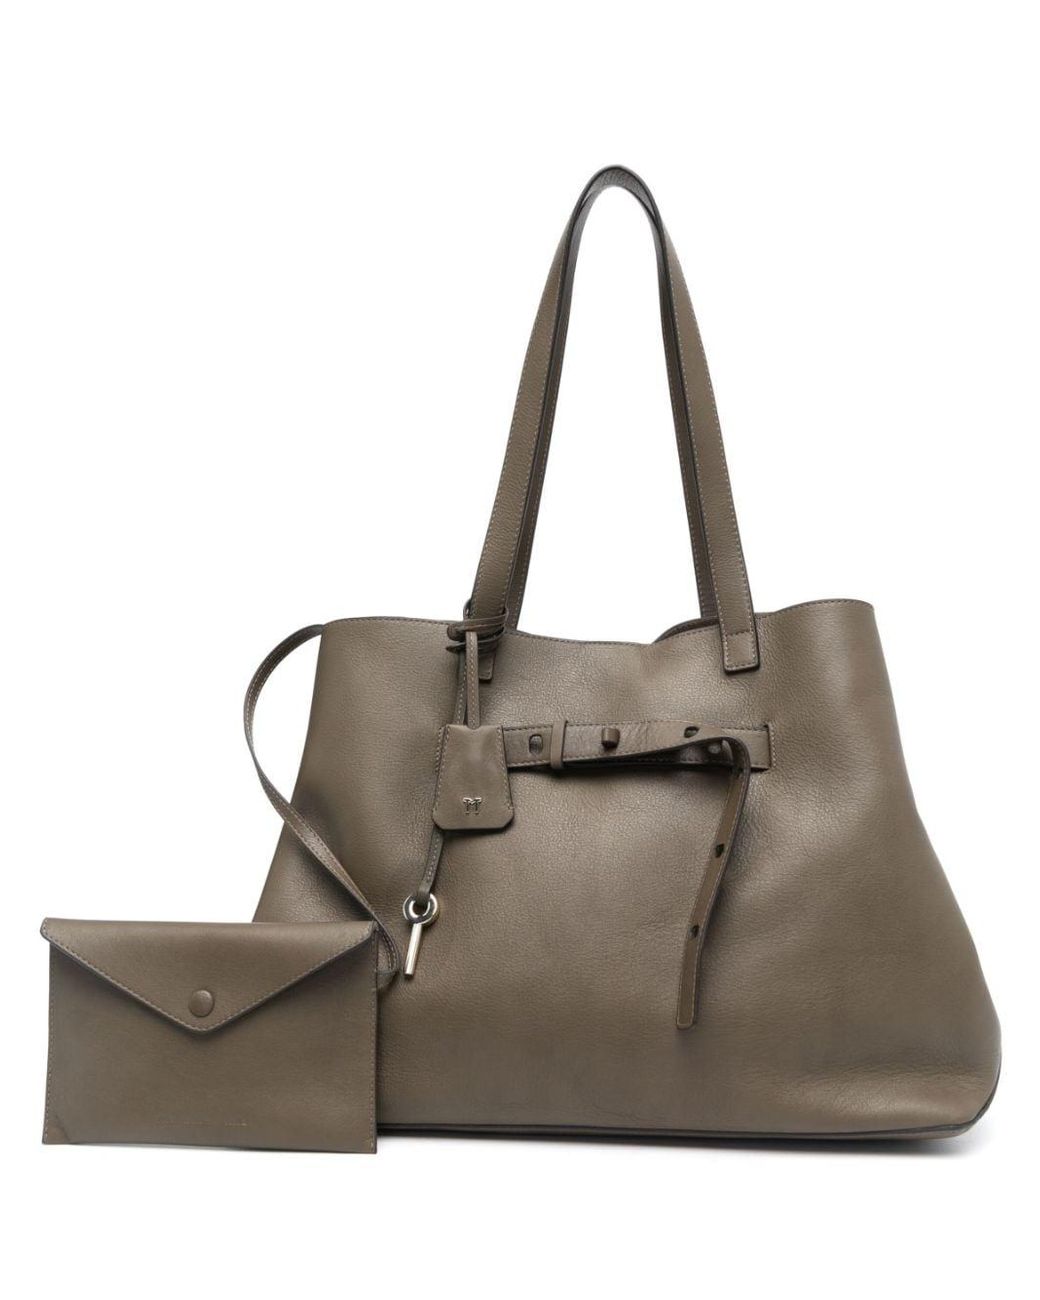 Tila March Lea Leather Tote Bag in Natural | Lyst